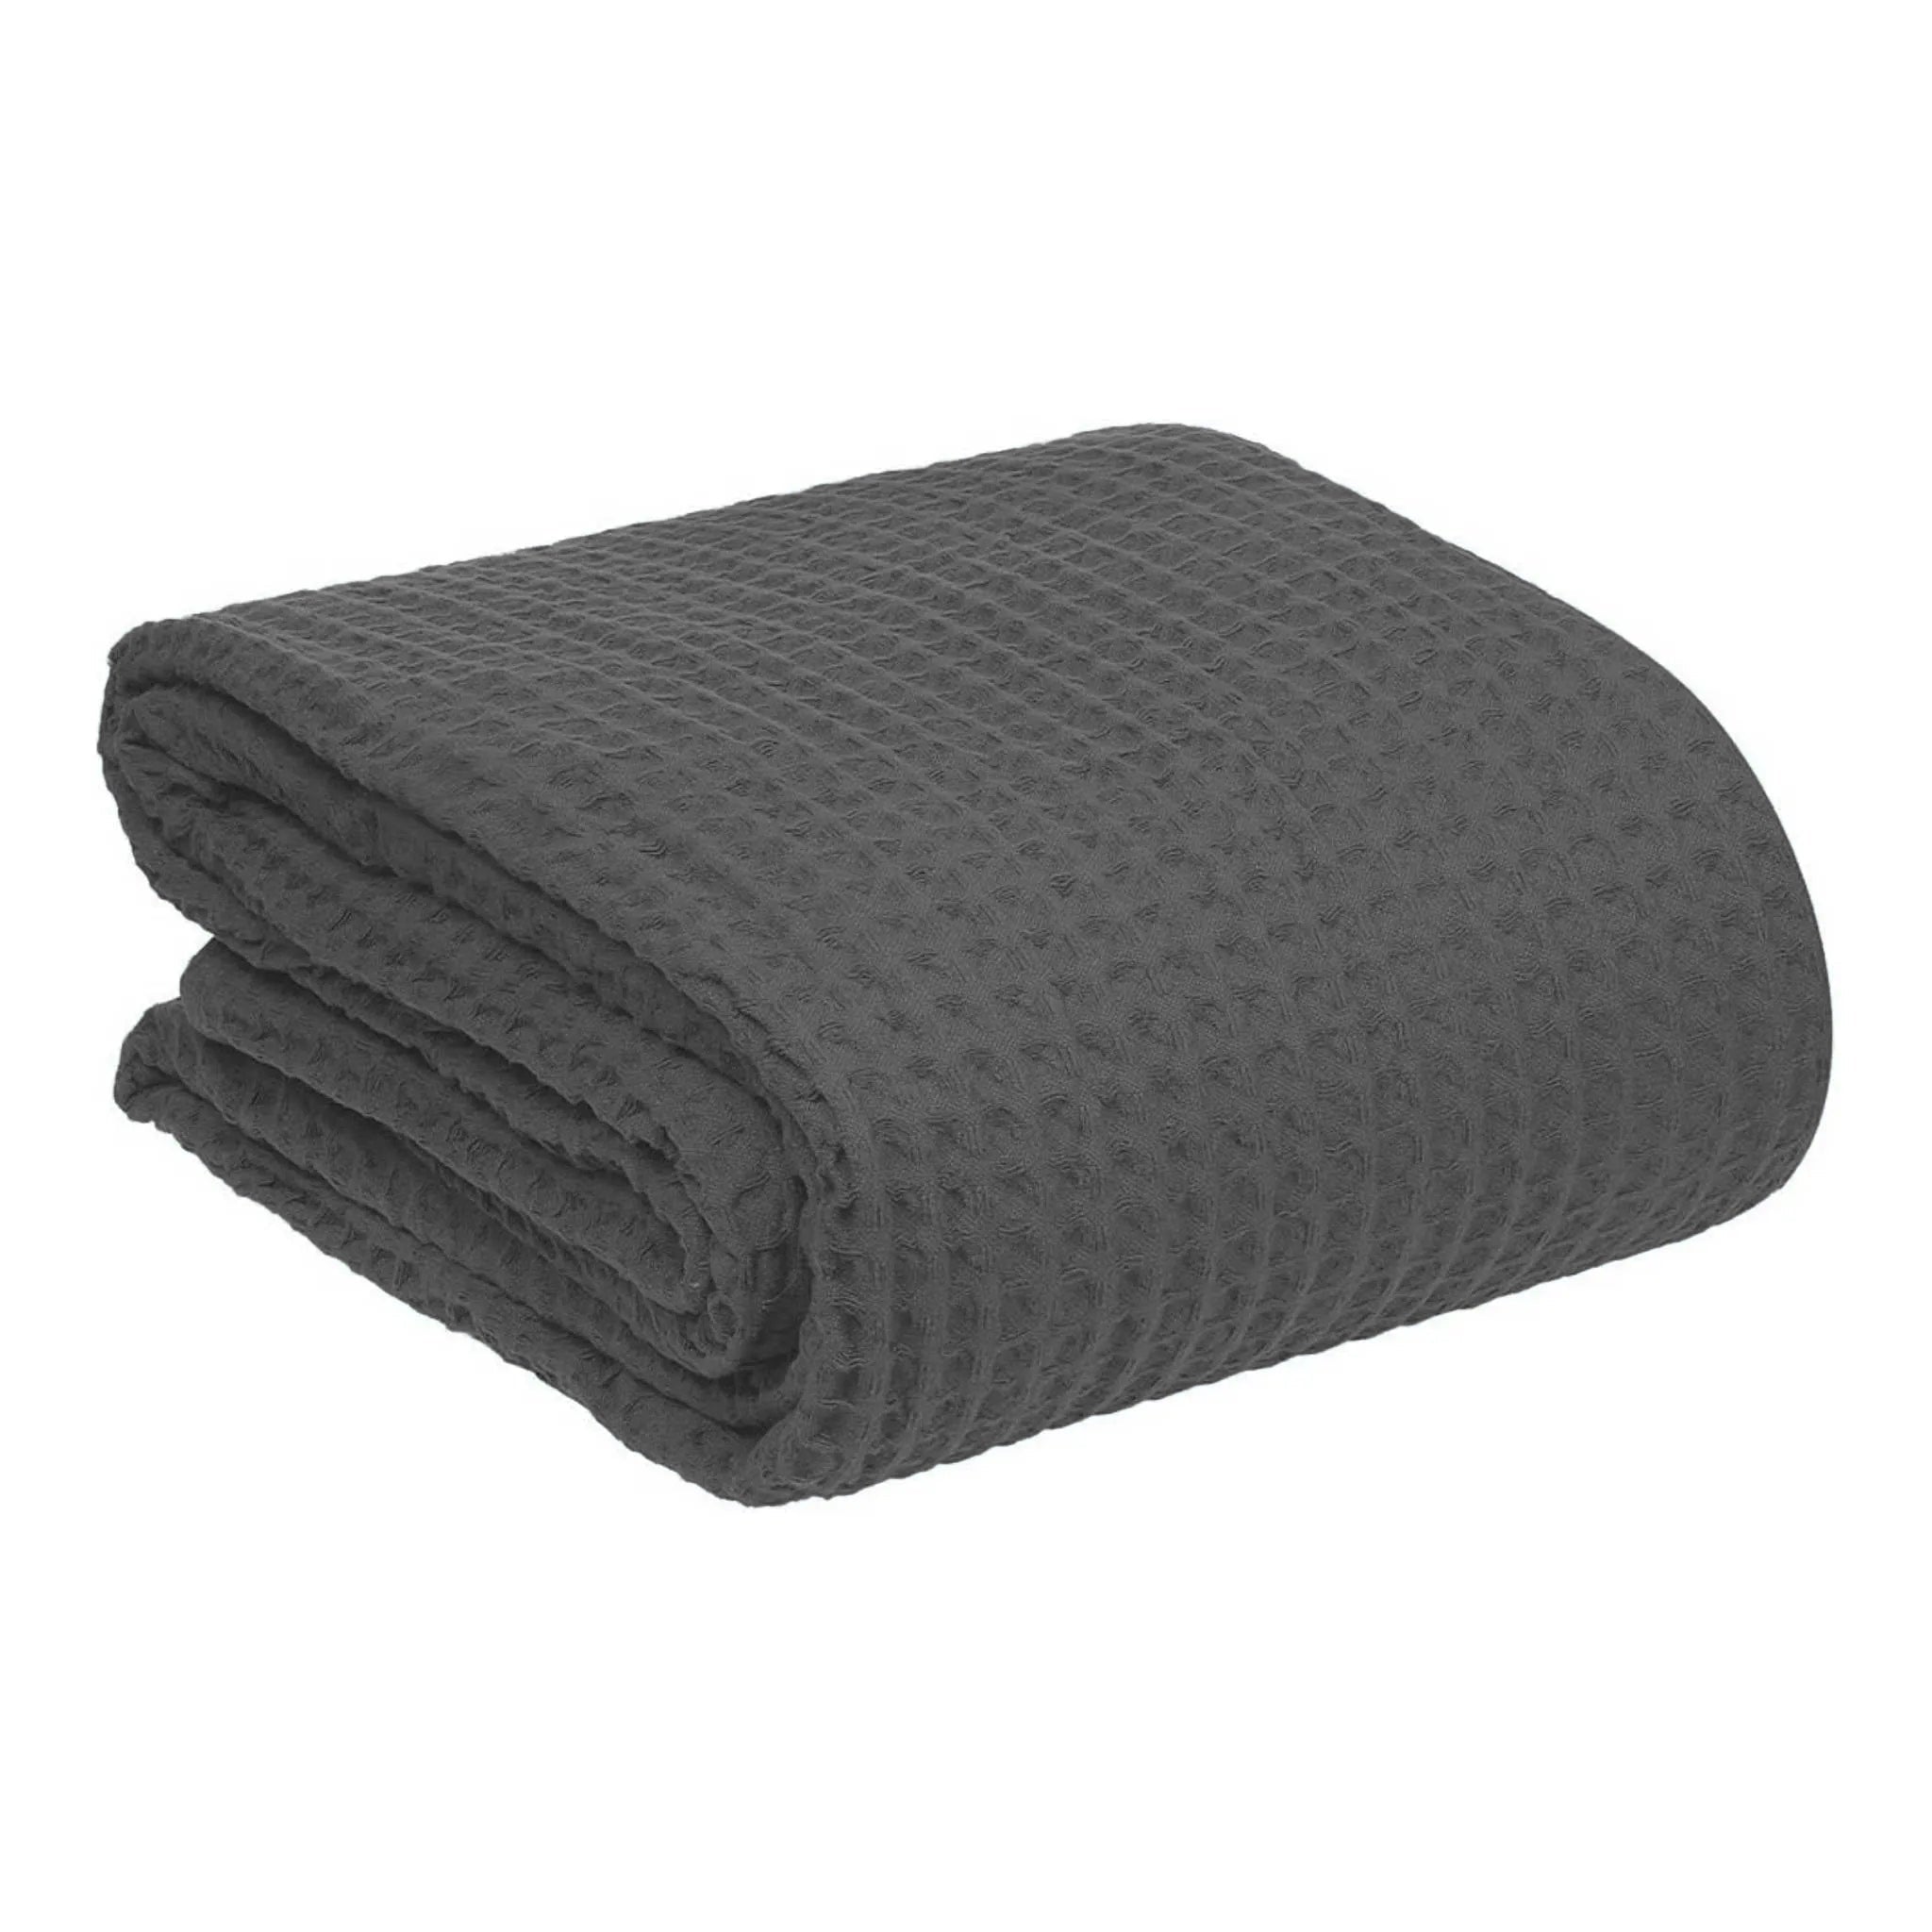 Cooling Cotton Waffle King Size Blanket - Lightweight Breathable Blanket of Rayon Derived from Bamboo for Hot Sleepers, Luxury Throws for Bed, Couch and Sofa, Dark Grey, 104x90 Inches